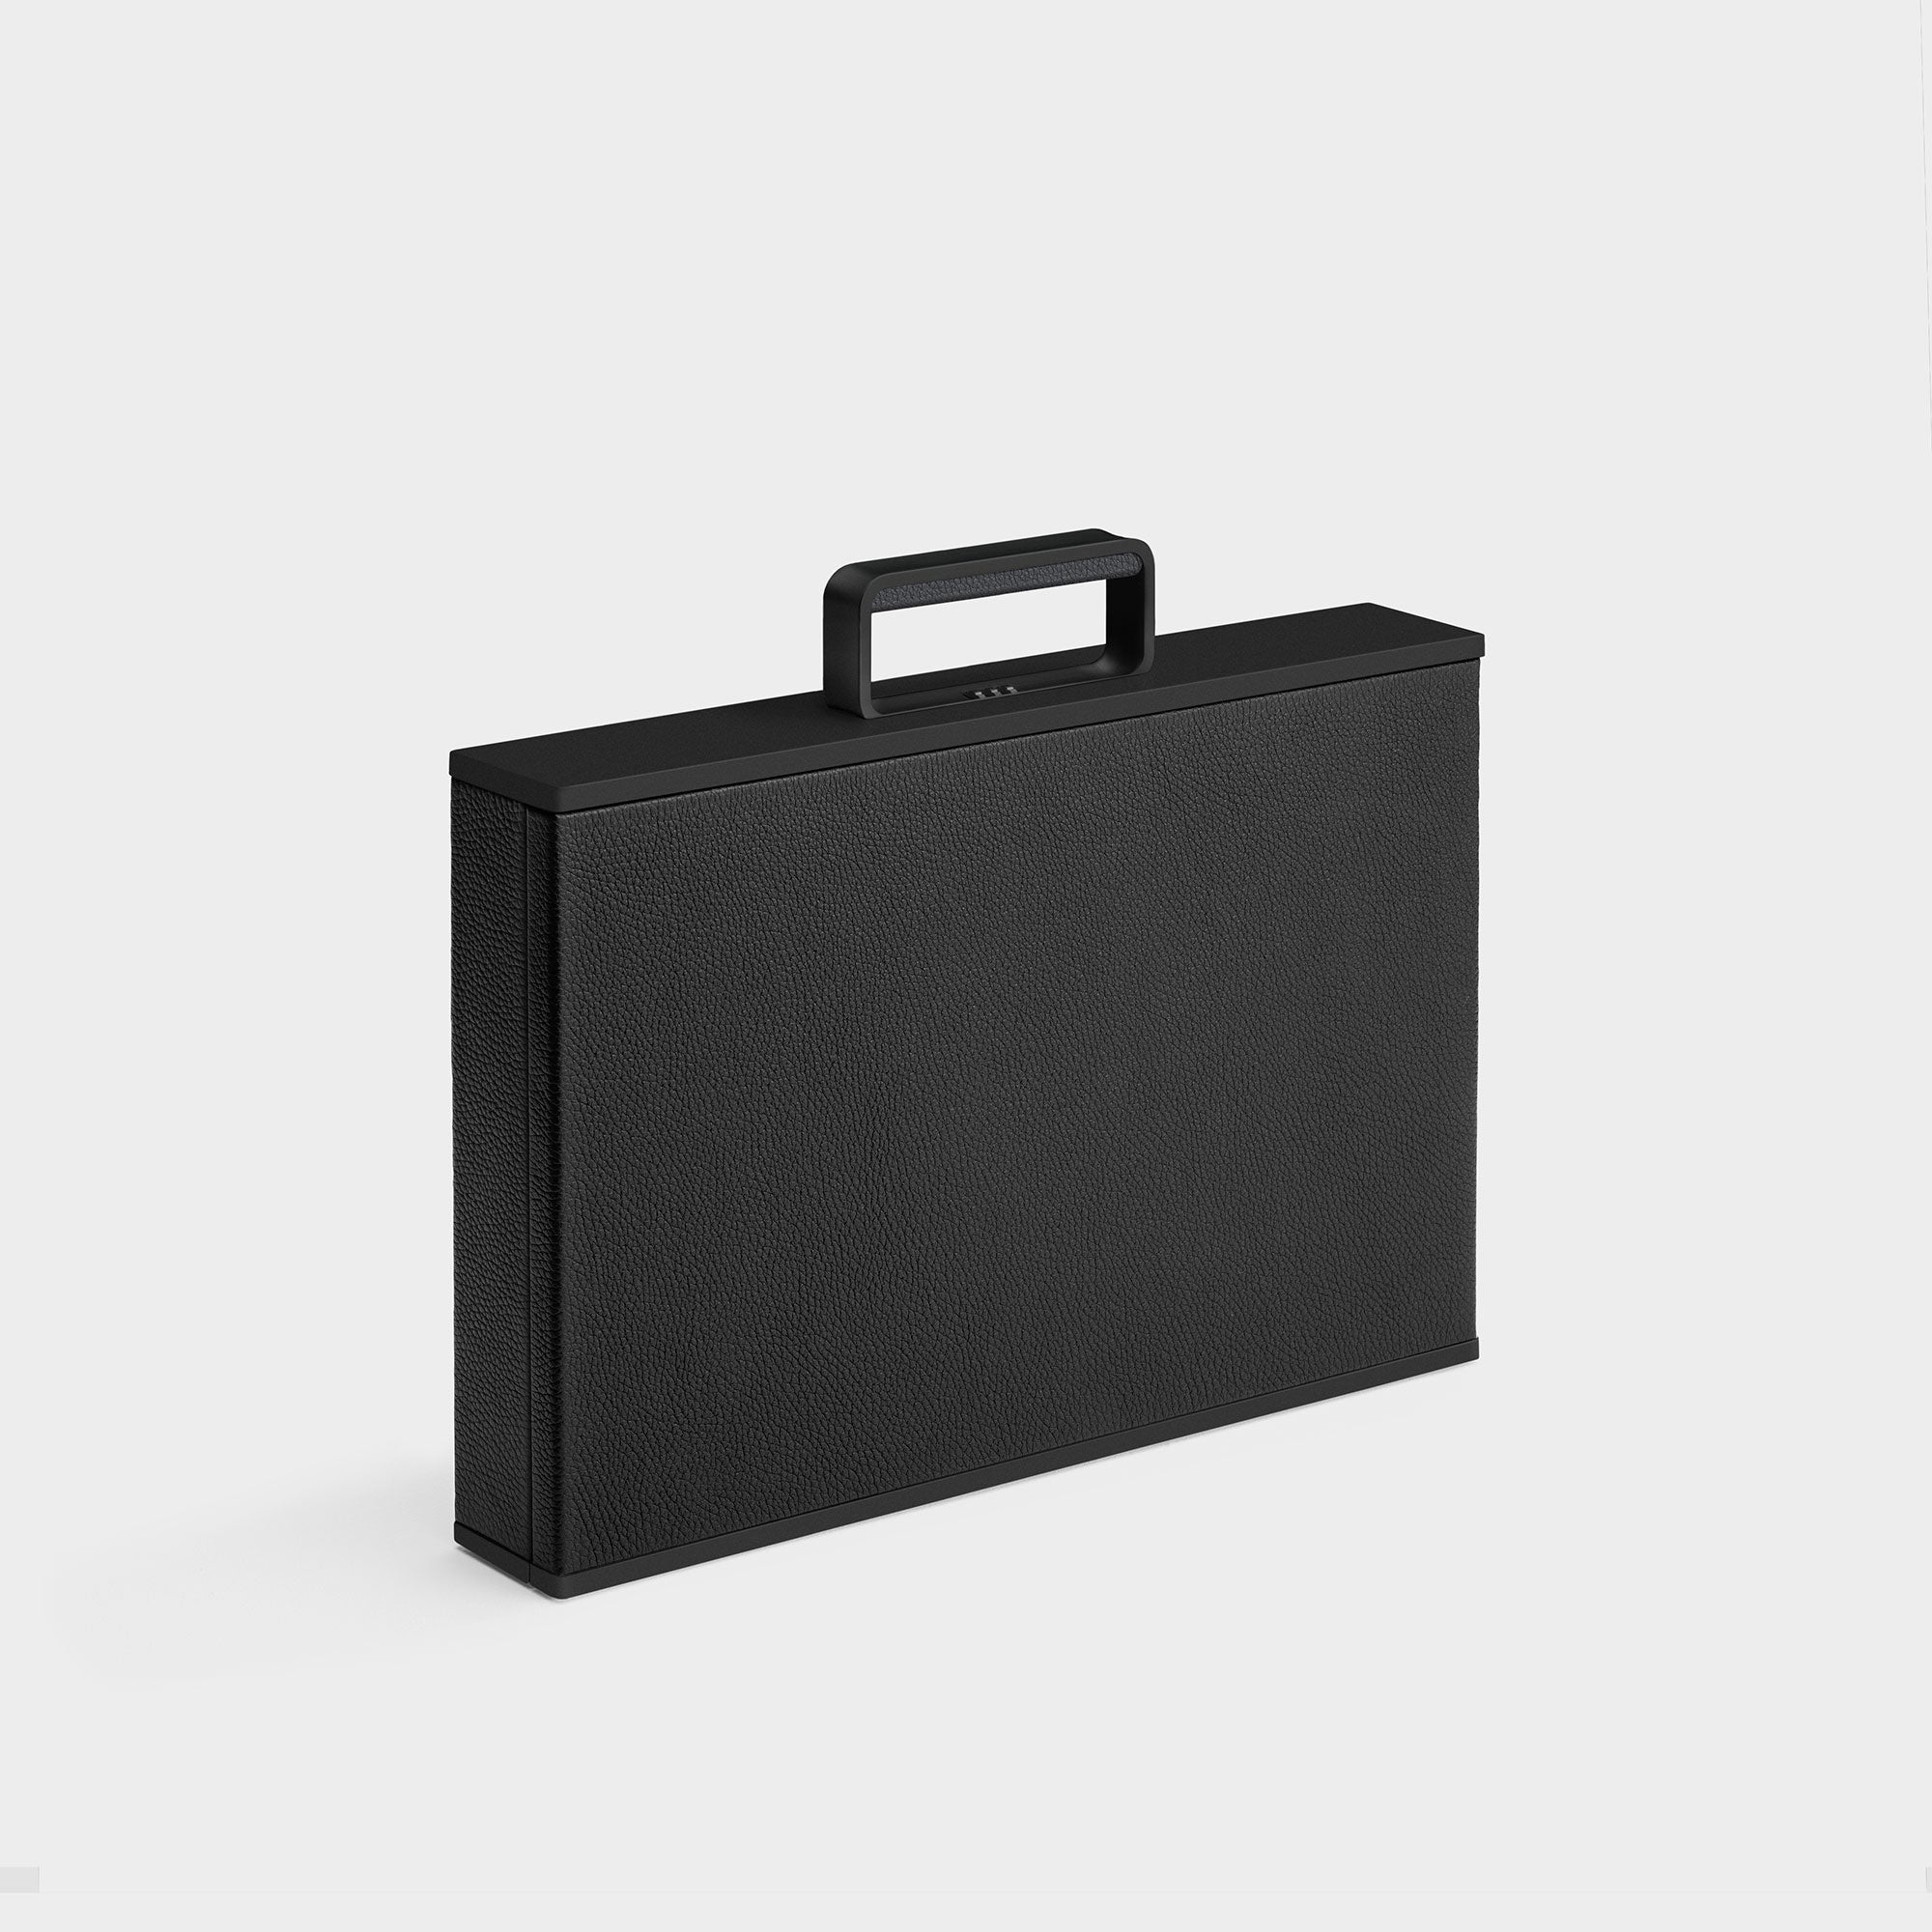 Product photo of closed Mackenzie watch briefcase in black leather and black aluminum.